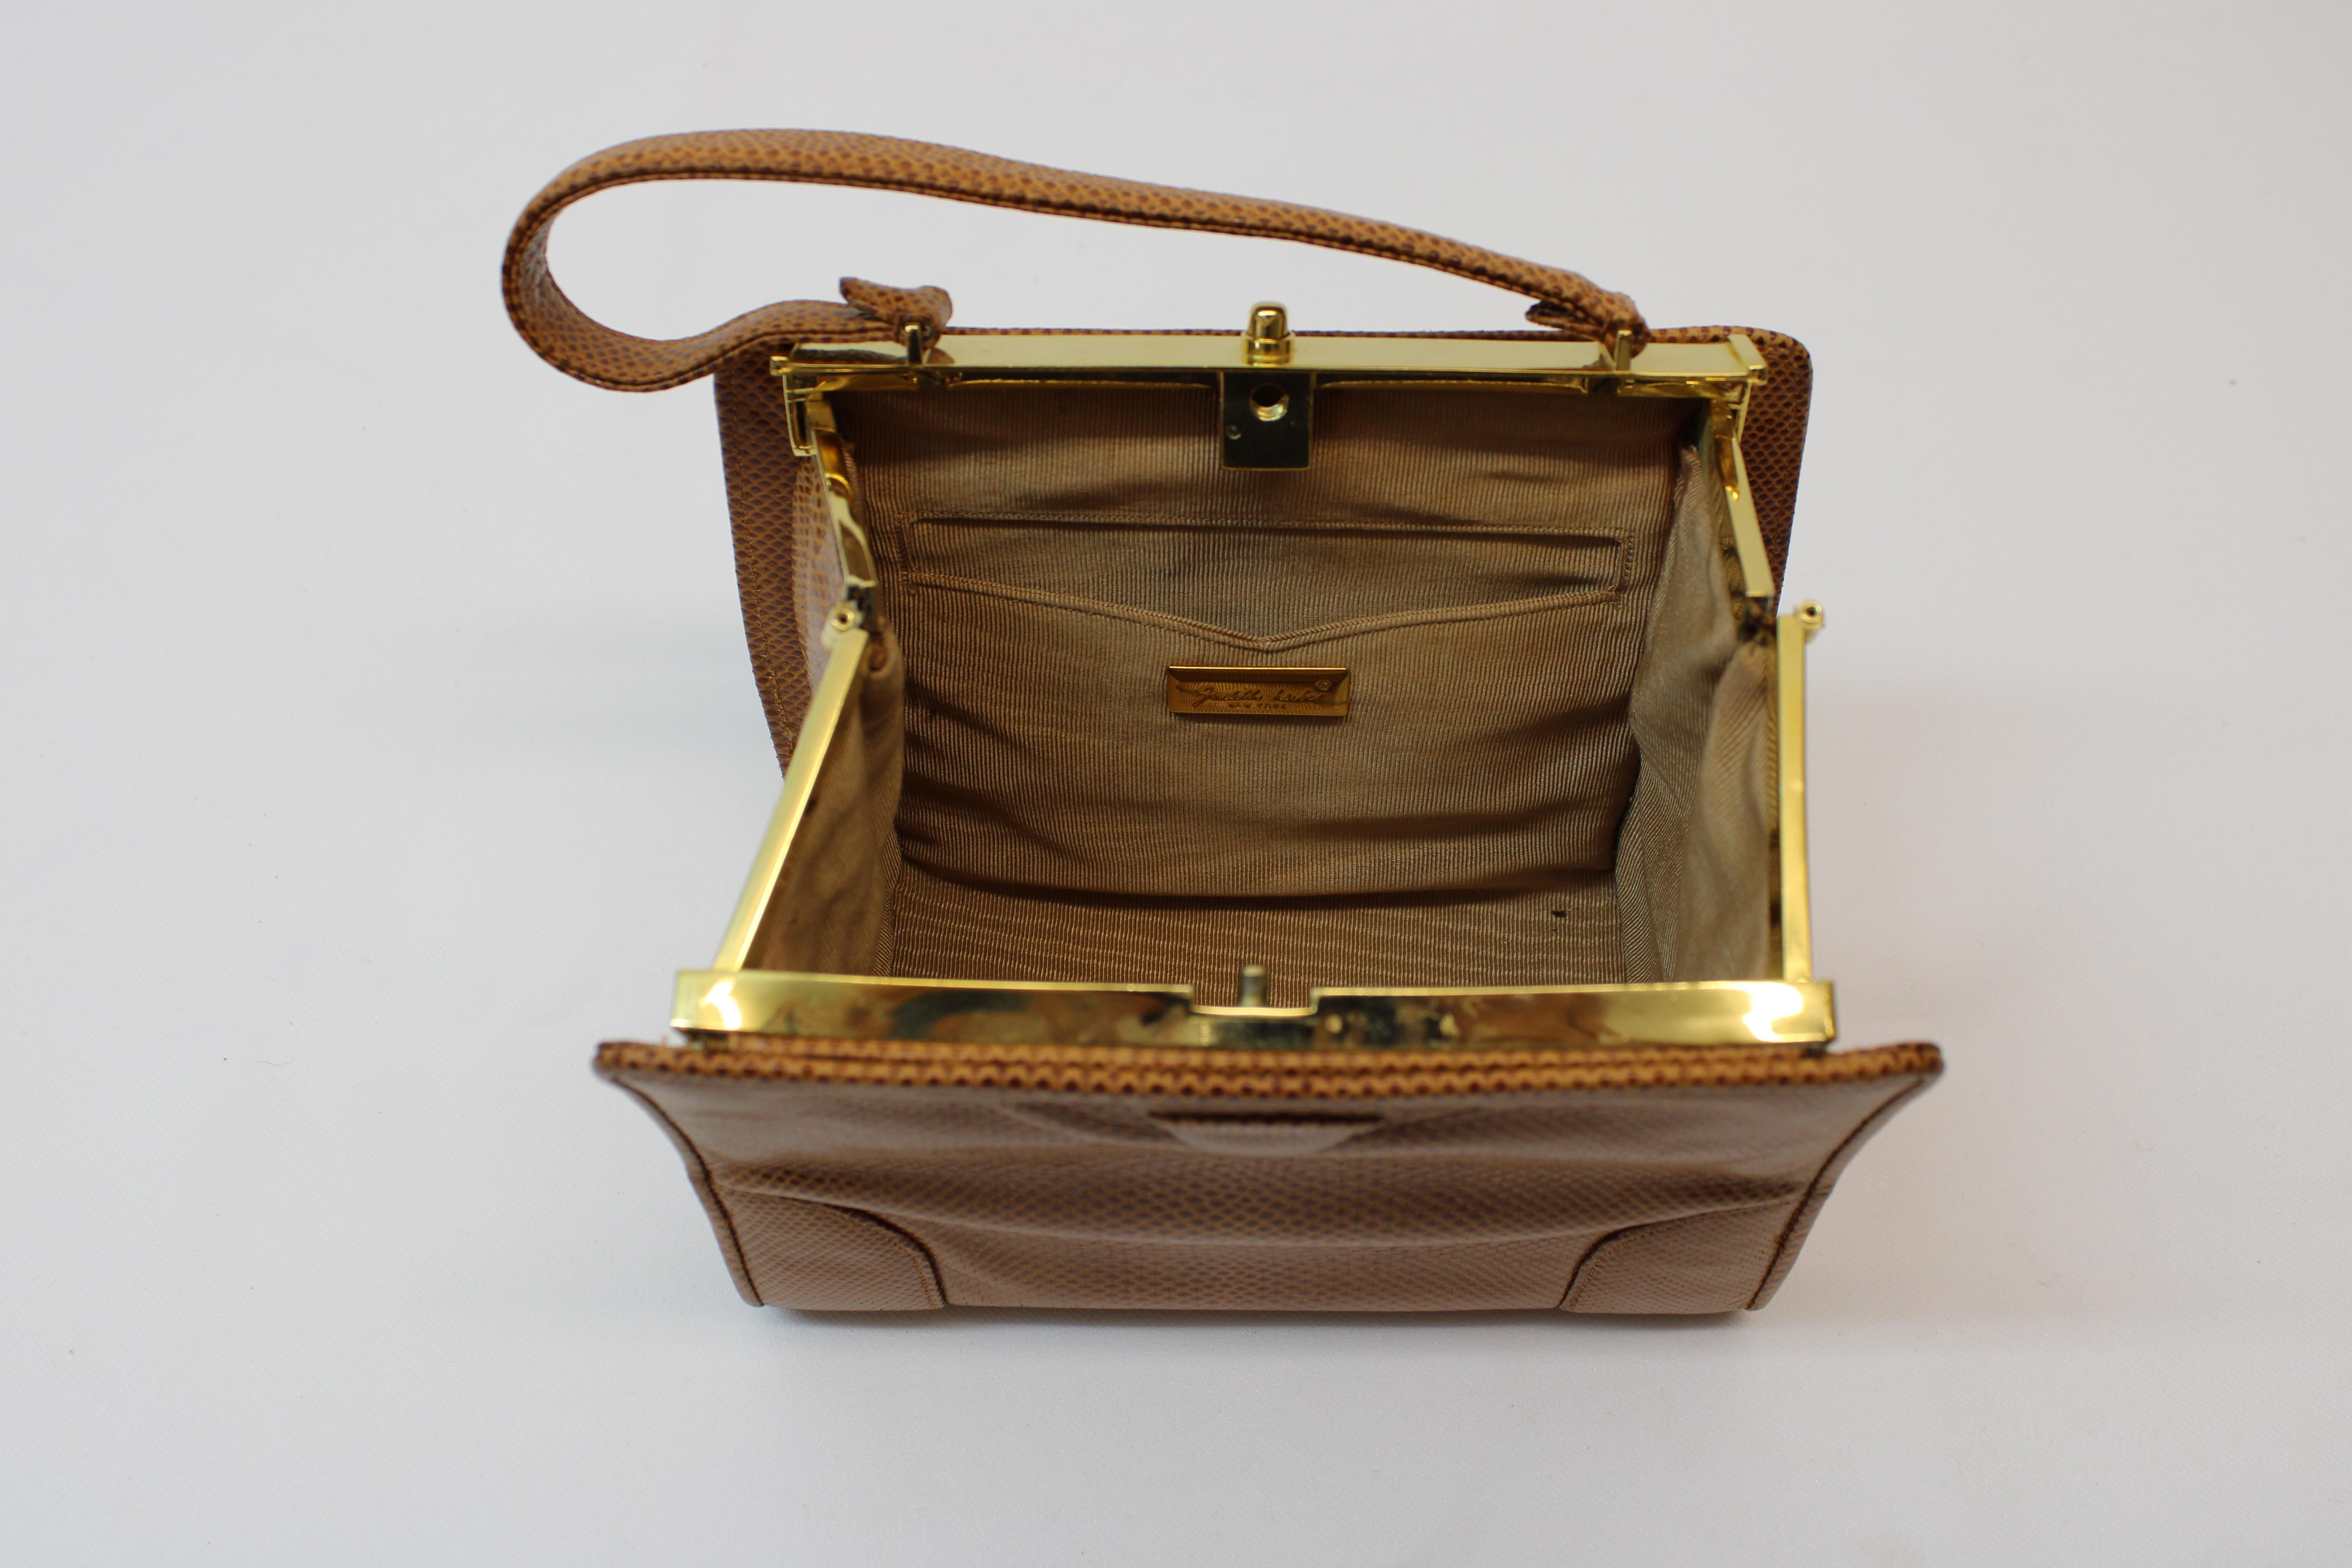 Adorable Judith Leiber brown lizard purse/satchel w/ gold tone hardware, this purse has a clasp to open and close & a cute handle. The Purse comes with a few item's that are a must need ( Compact mirror, small comb & coin holder ).